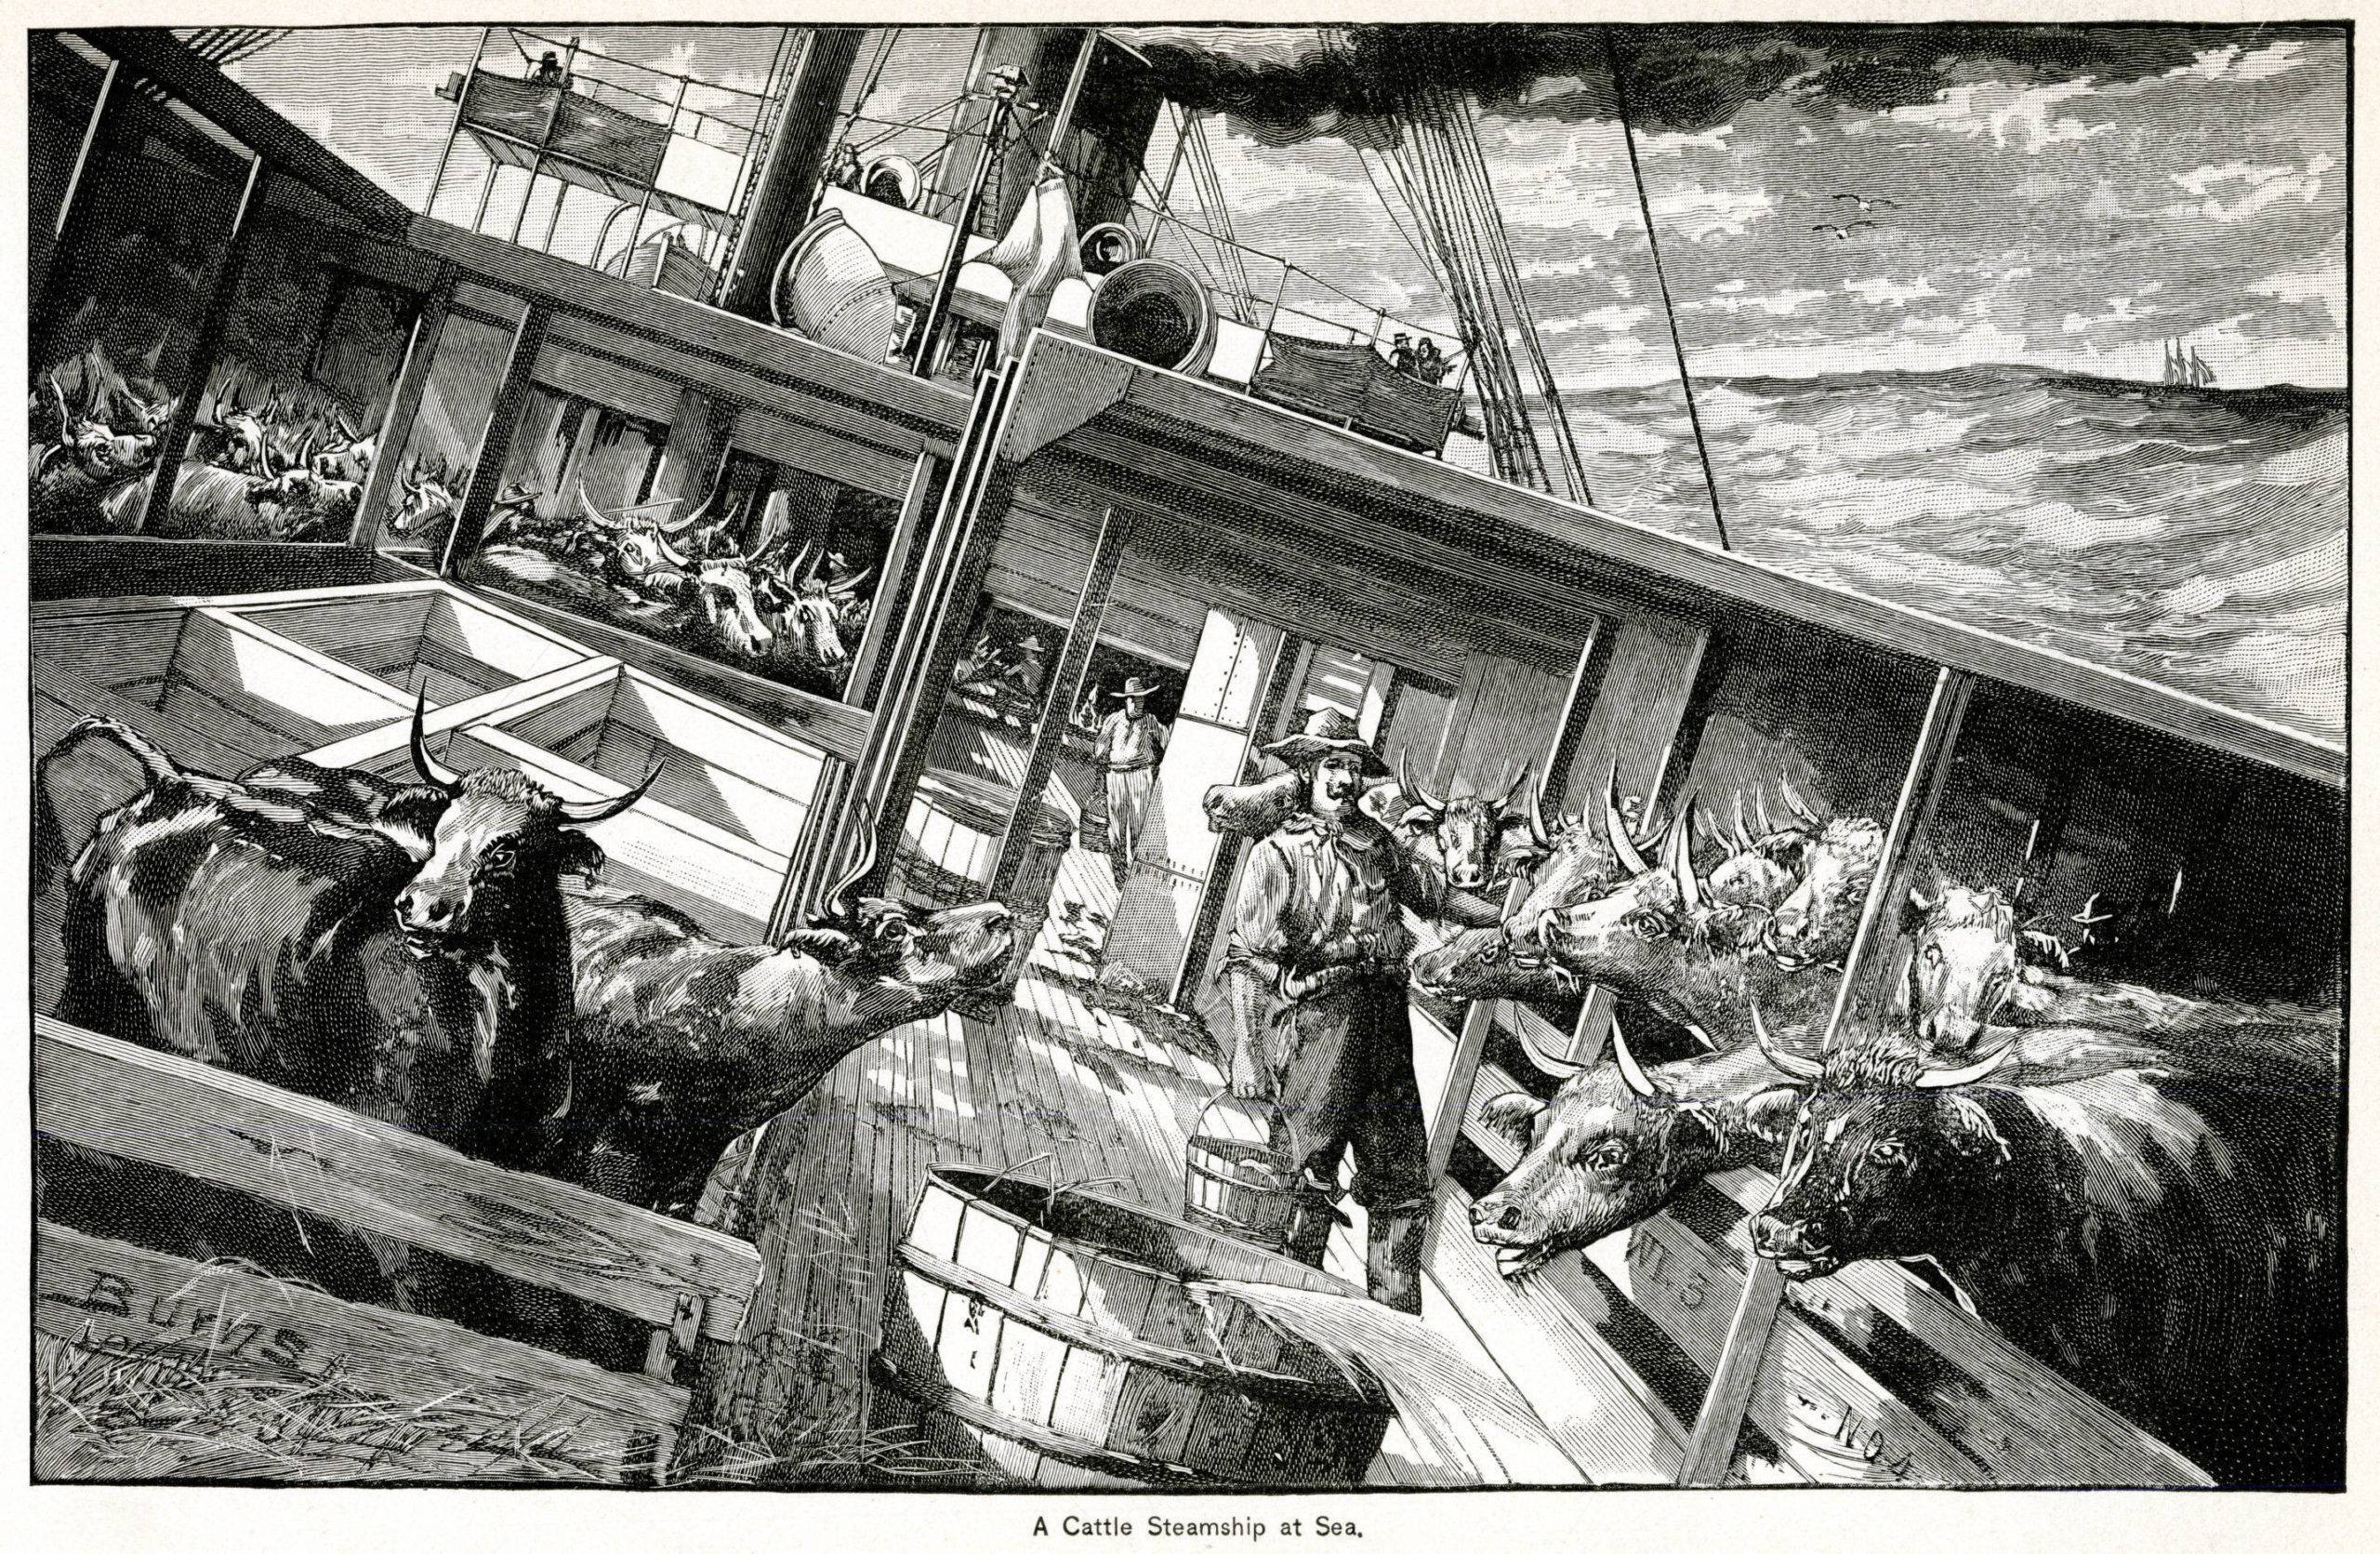 Vessels were tied up to the docks in Jersey City and Weehawken in America. The cattle were loaded up onto narrow gang-planks and placed in strongly constructed pens between decks as well as upper deck packing the cattle tightly, for the final destination to Liverpool in England.

1891  -  - 12067358.JPG - Credit:  Mary Evans Picture Library/SIPA - 1903251149 Sipa (C)